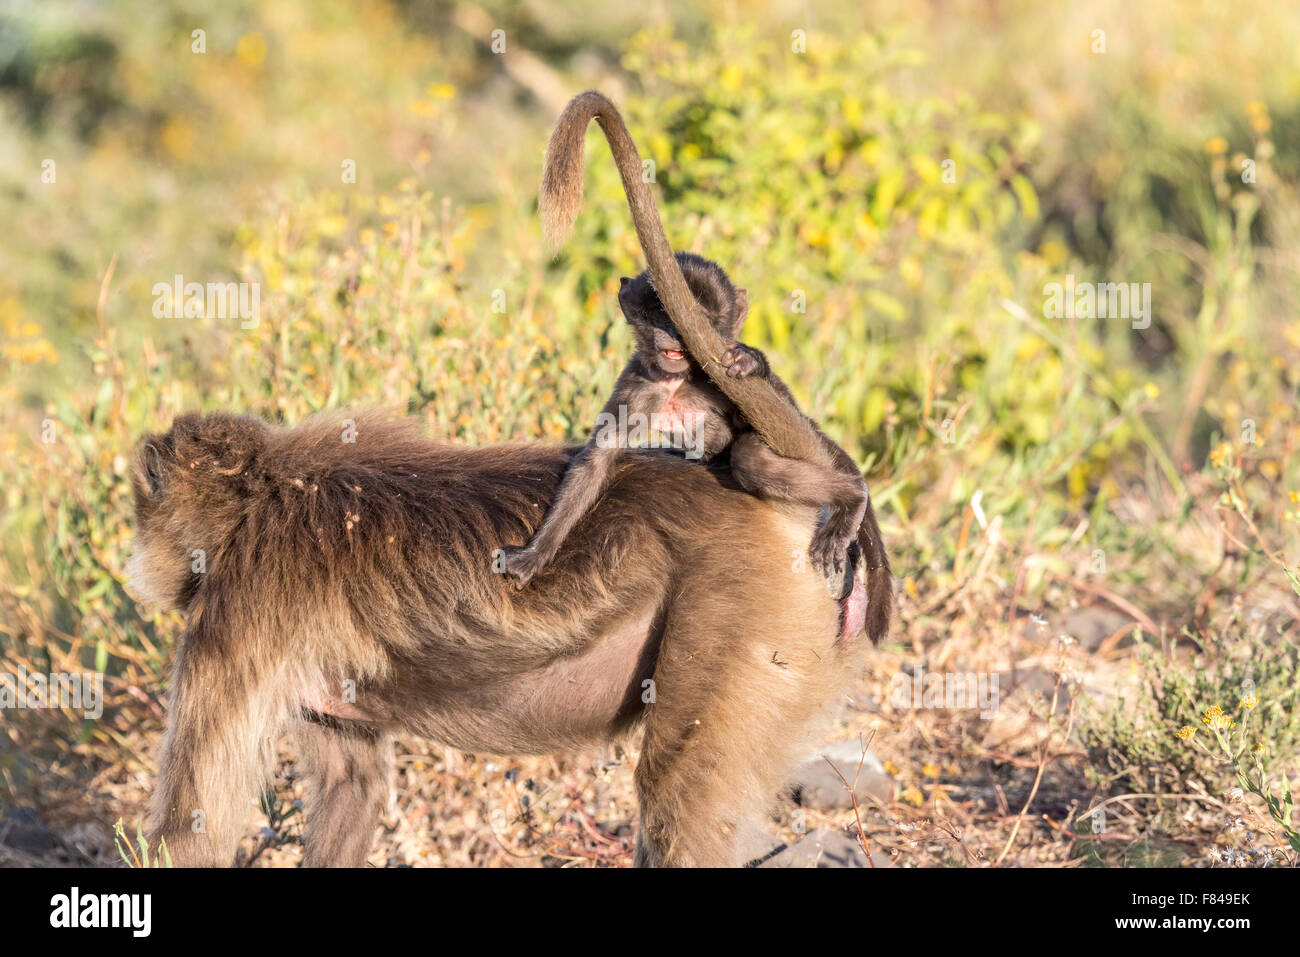 A mother Gelada Baboon with a baby on her back at Debre Libanos, Ethiopia Stock Photo